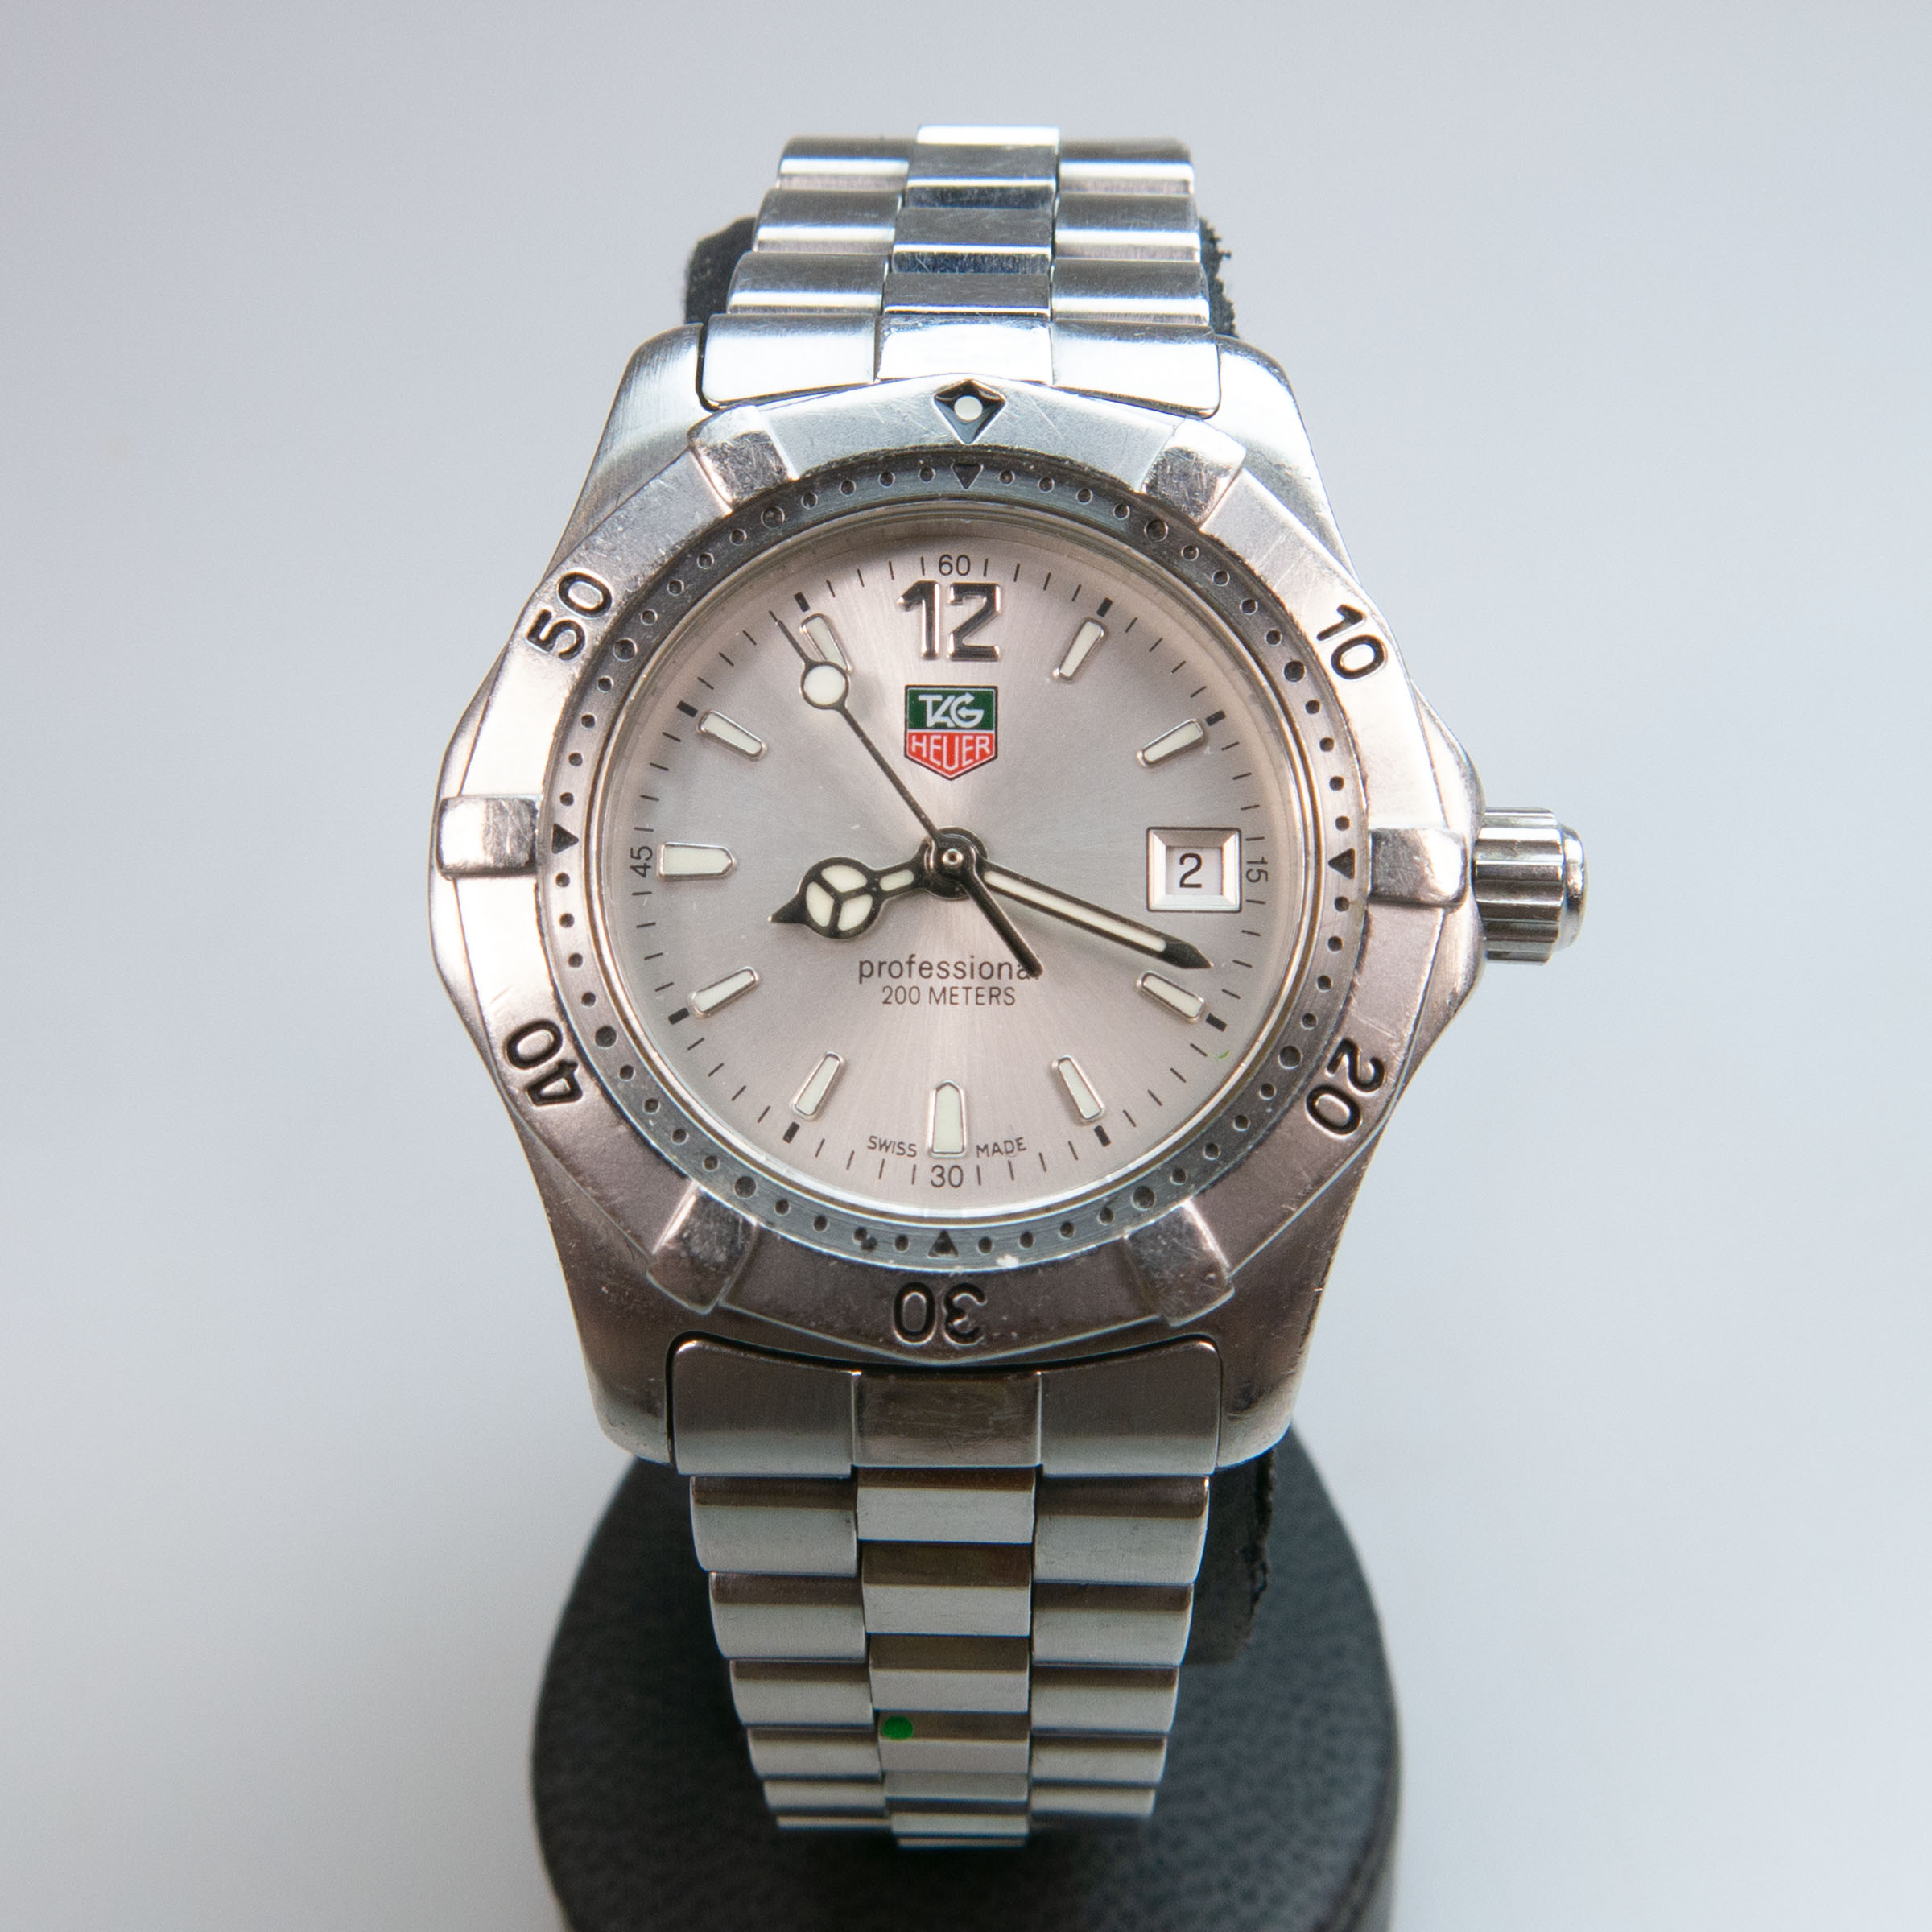 Lady's Tag/Heuer Wristwatch, With Date